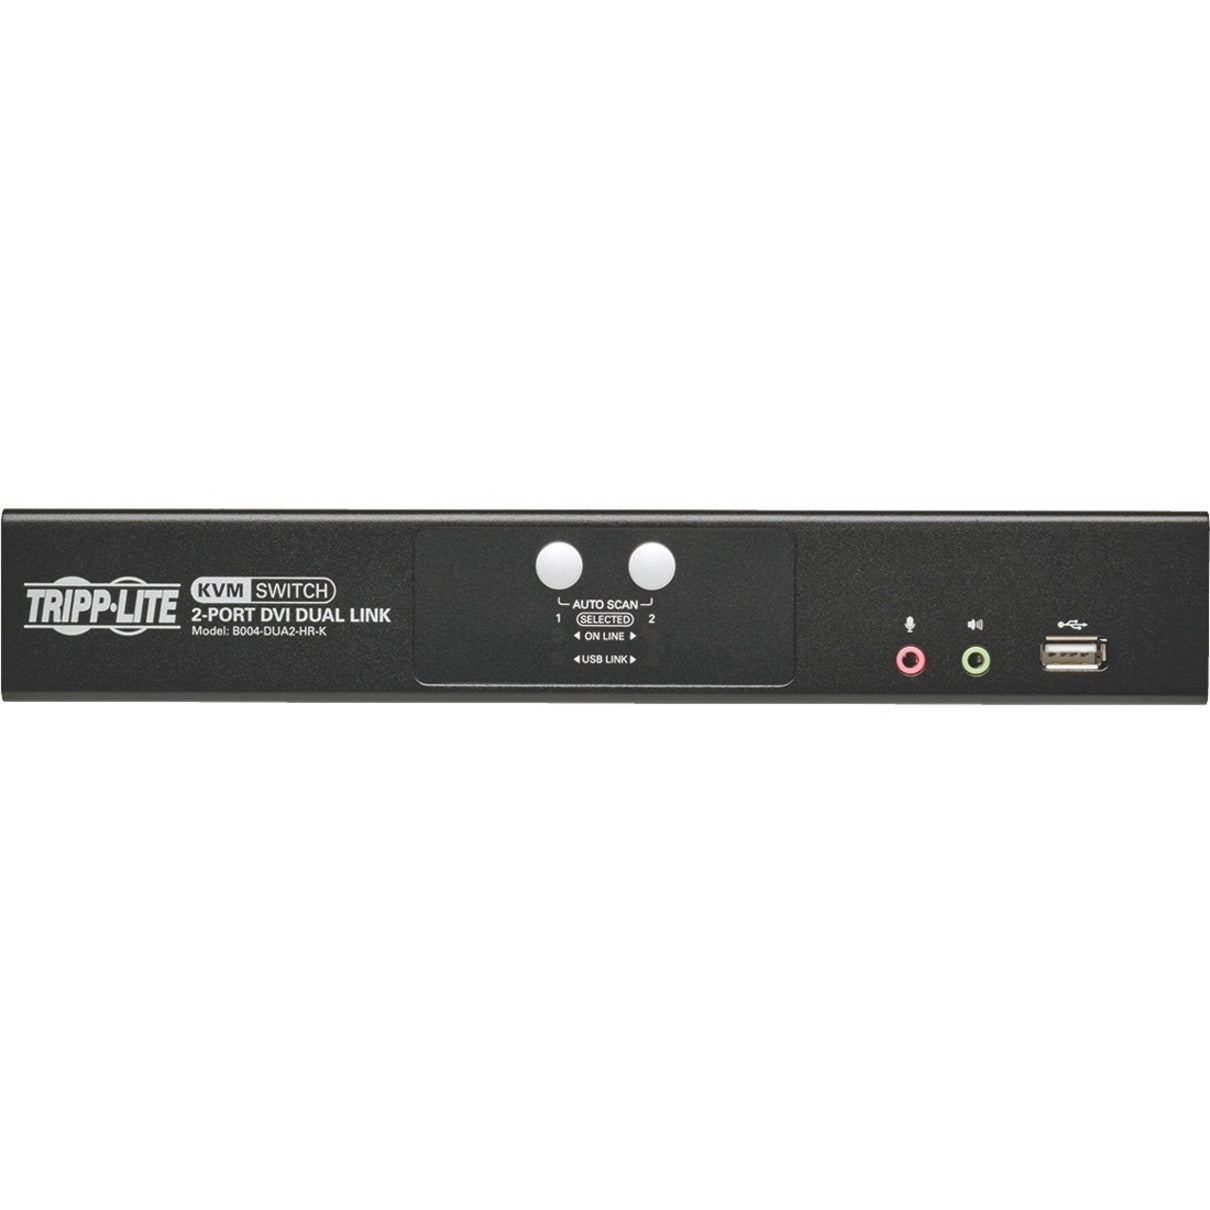 Tripp Lite B004-DUA2-HR-K 2-Port DVI Dual-Link / USB KVM Switch with Audio and Cables, WQUXGA, 2560 x 1600, TAA Compliant, 3 Year Warranty